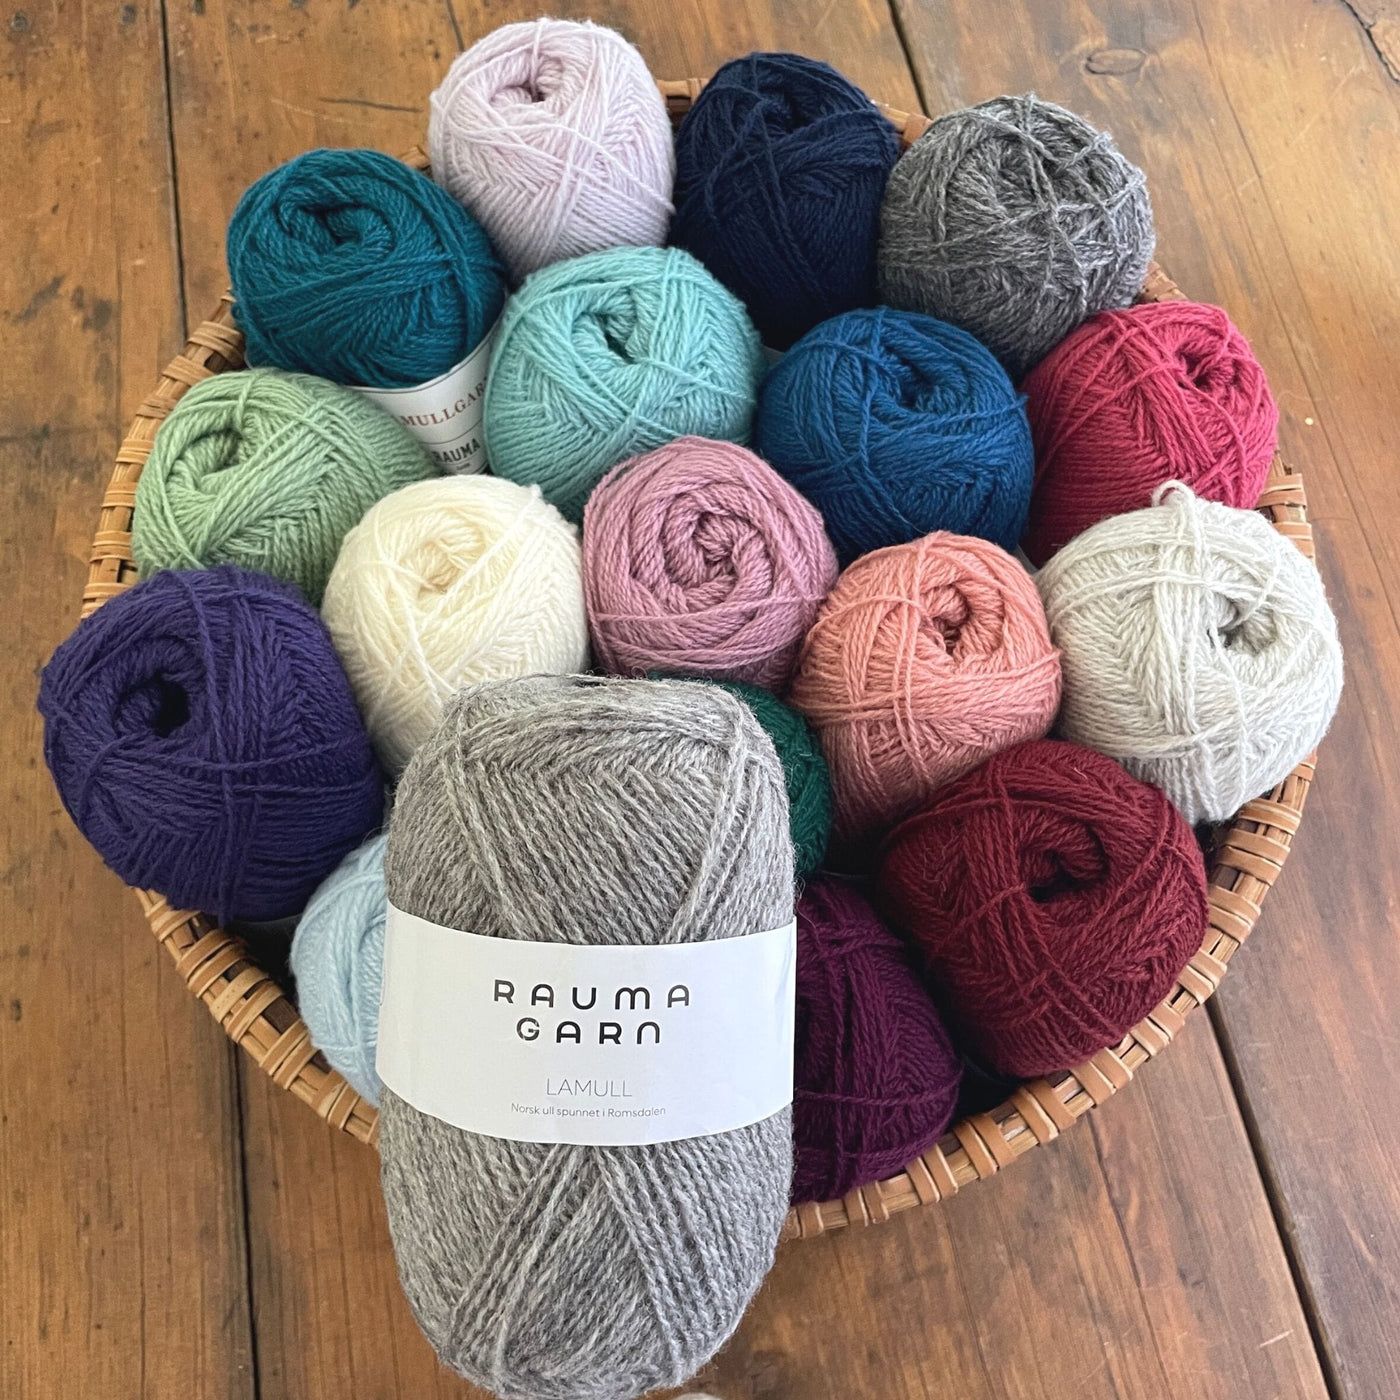 A basket filled with a variety of skeins of Rauma Lamullgarn fingering weight wool yarn.